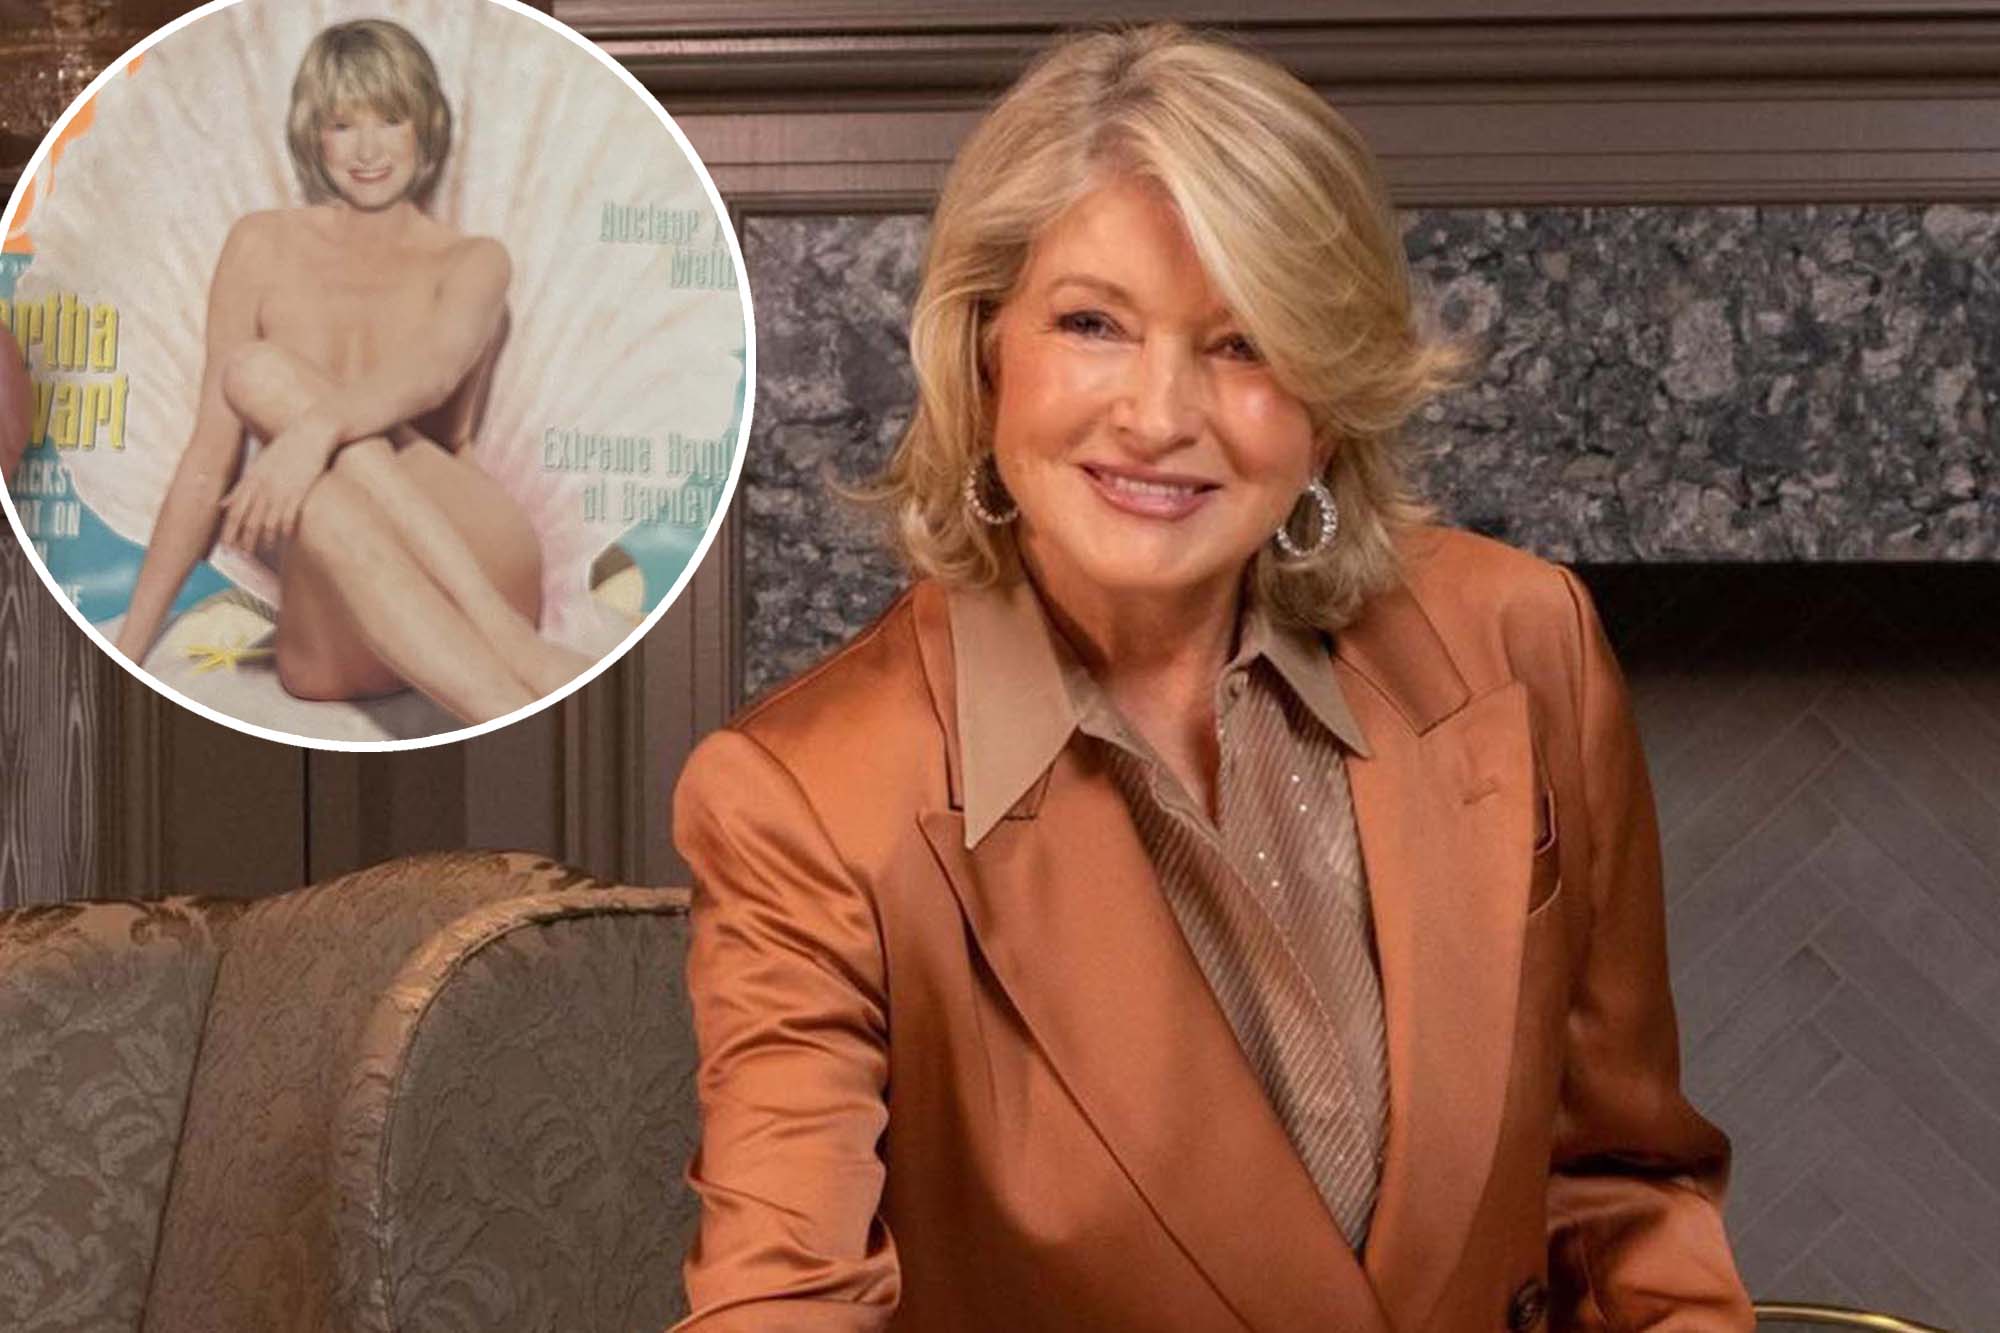 darren christianson recommends nude pictures of martha stewart pic